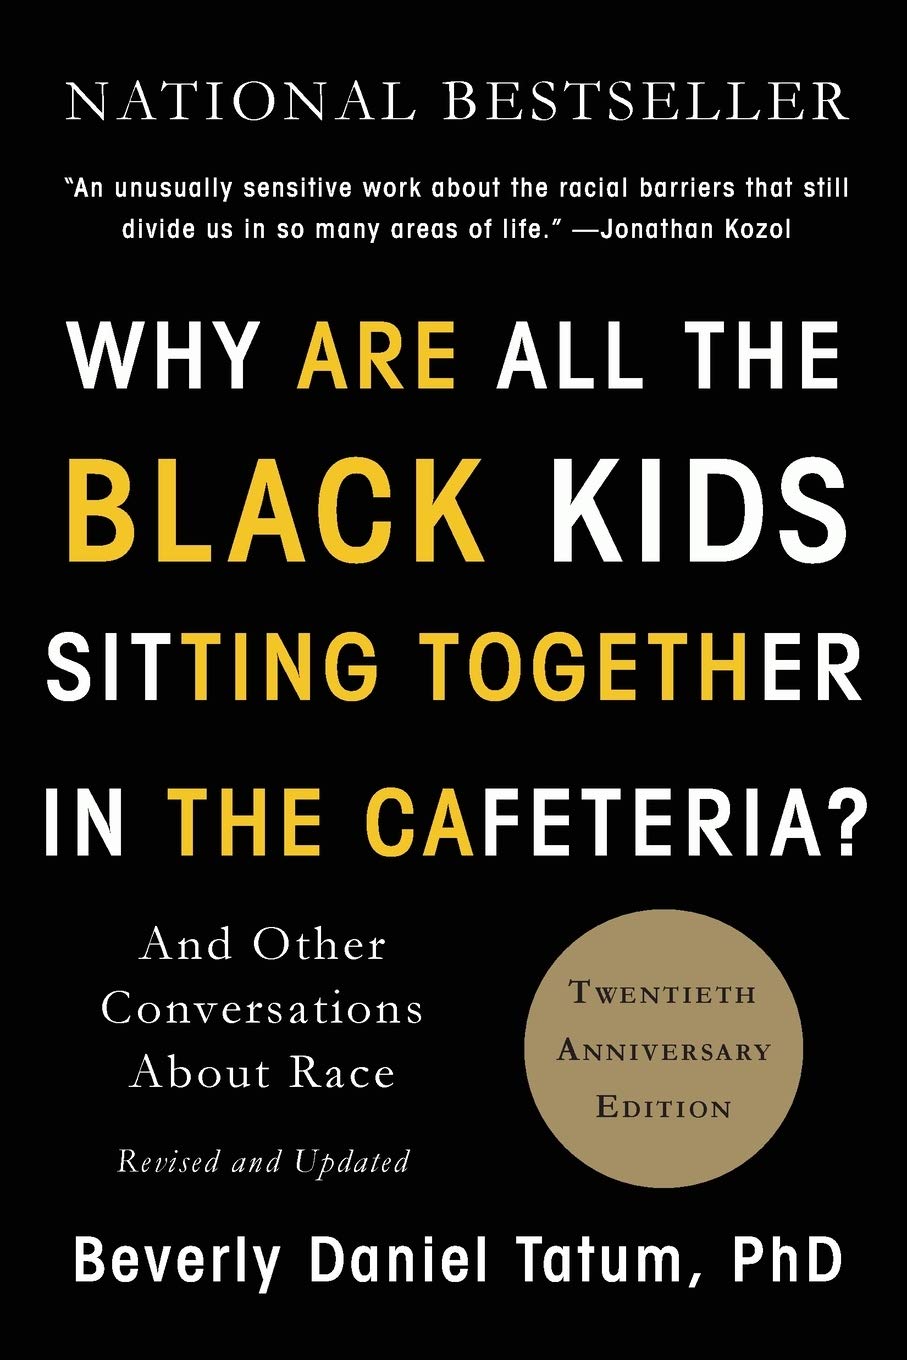 Why Are All the Black Kids Sitting Together in the Cafeteria?